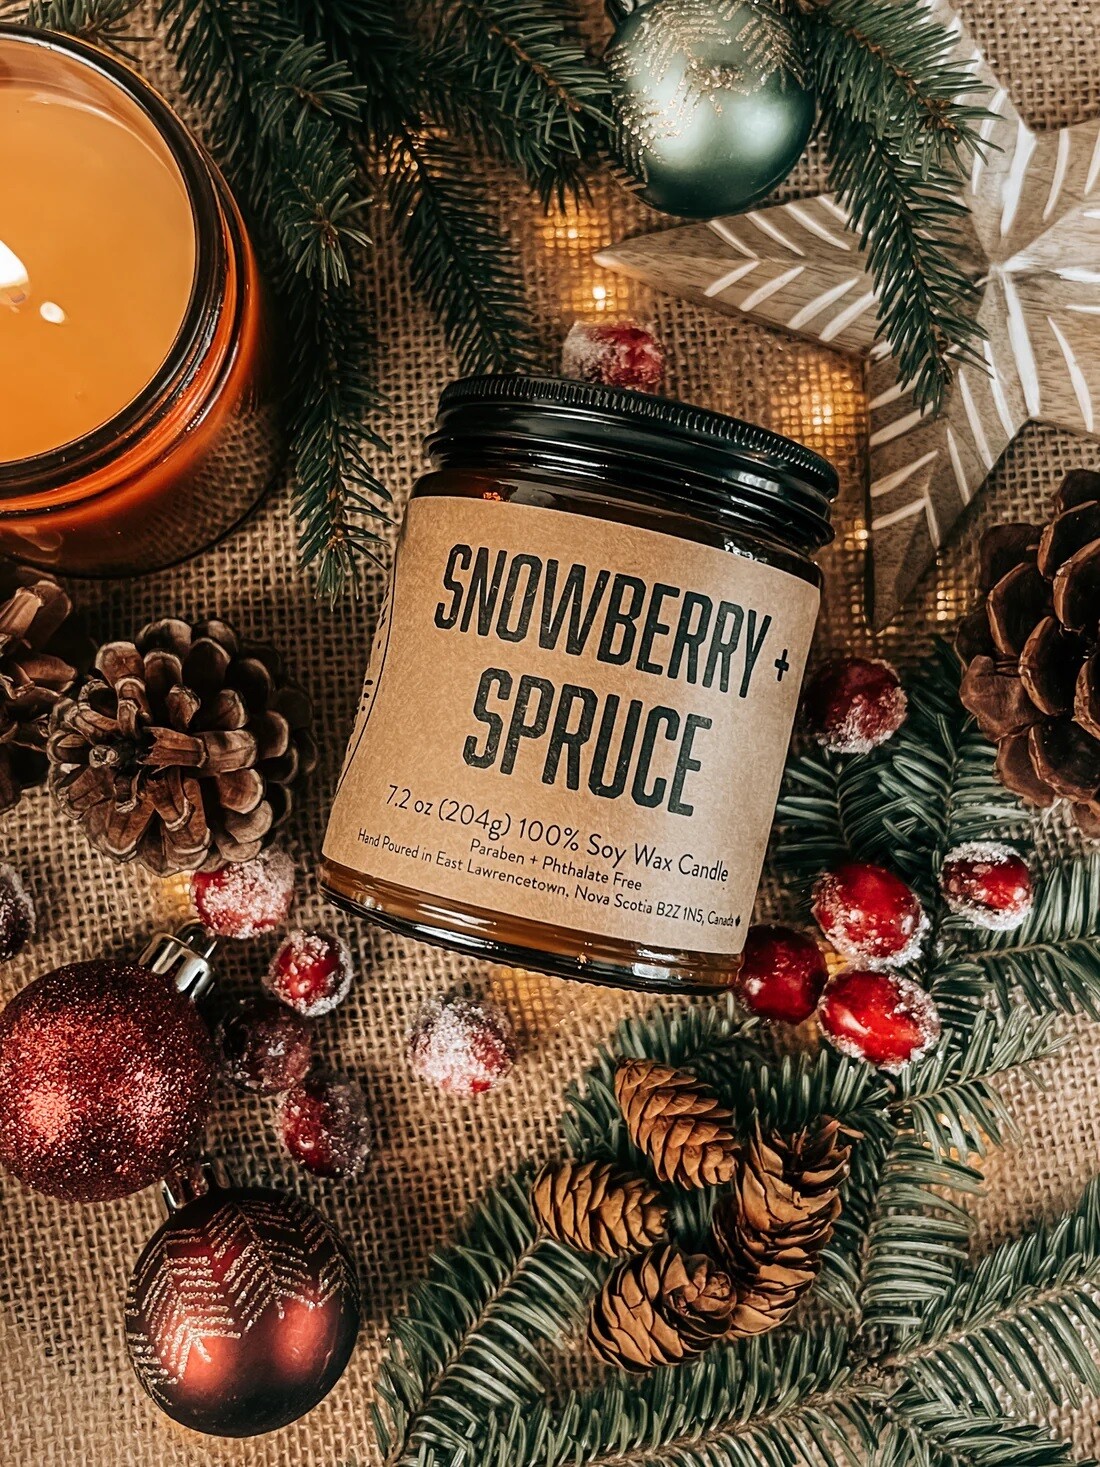 Snowberry and Spruce- Lawrencetown Candle Co